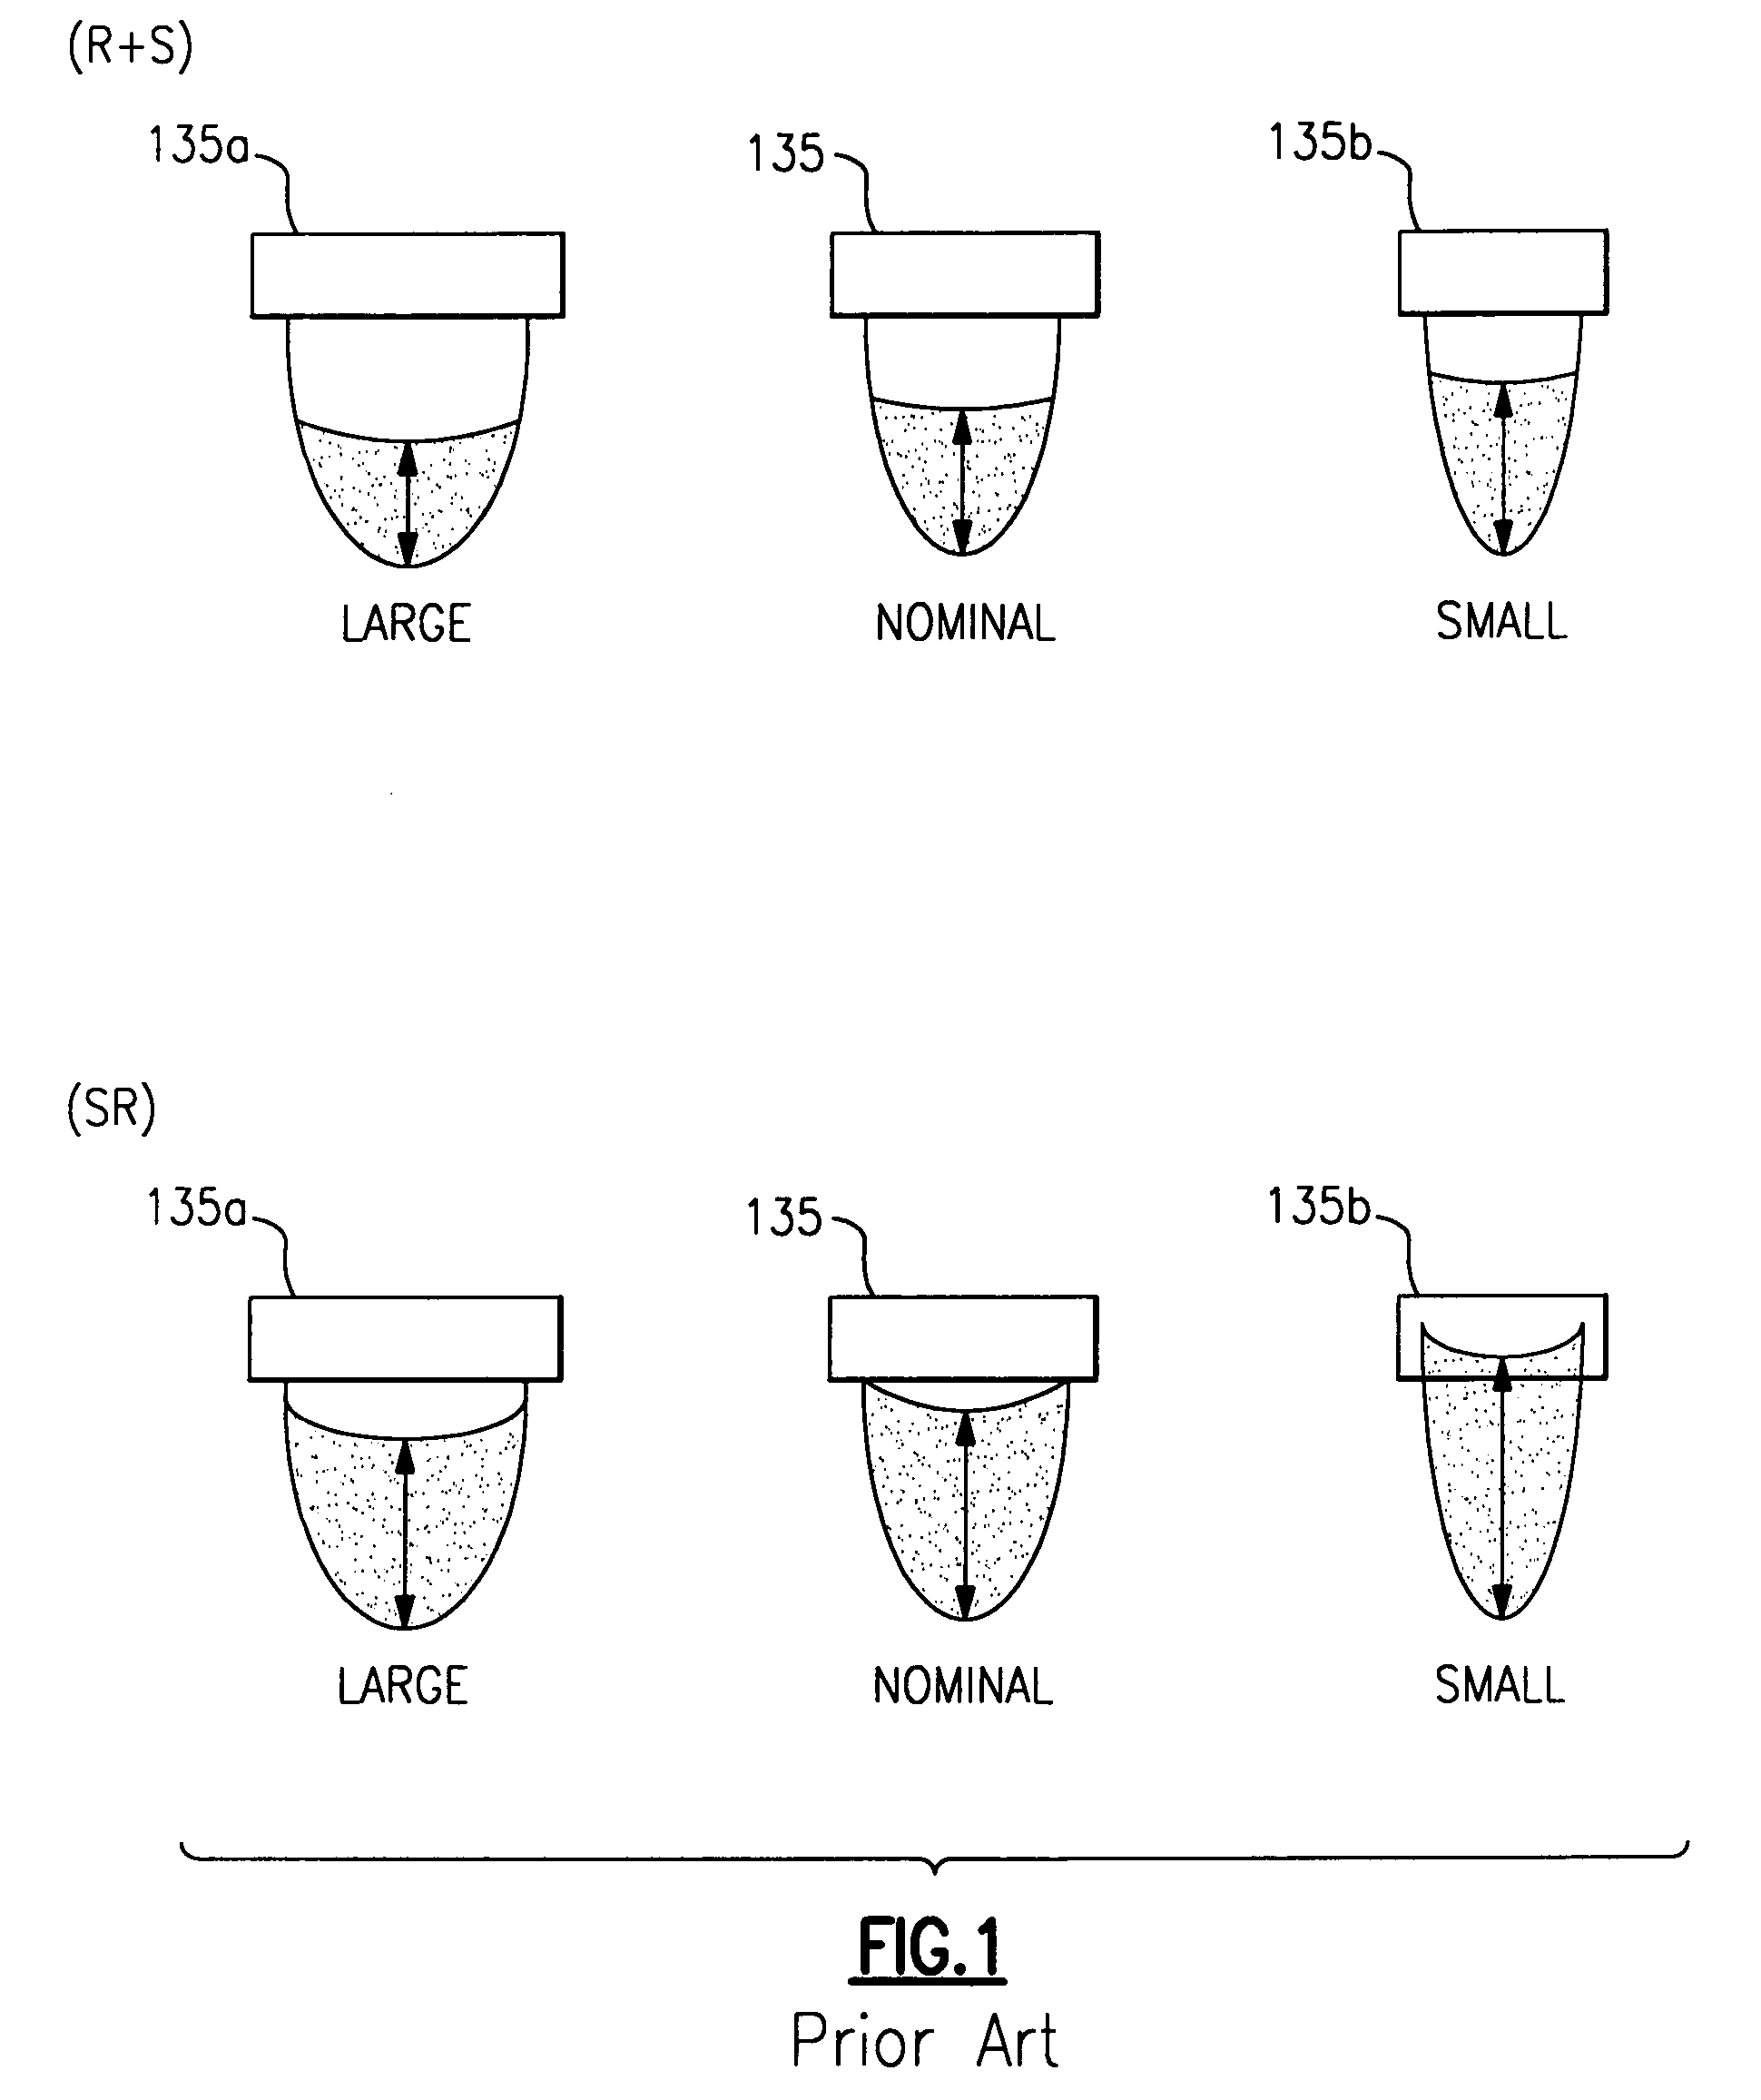 Fluid measurements in a reaction vessel used in conjunction with a clinical analyzer